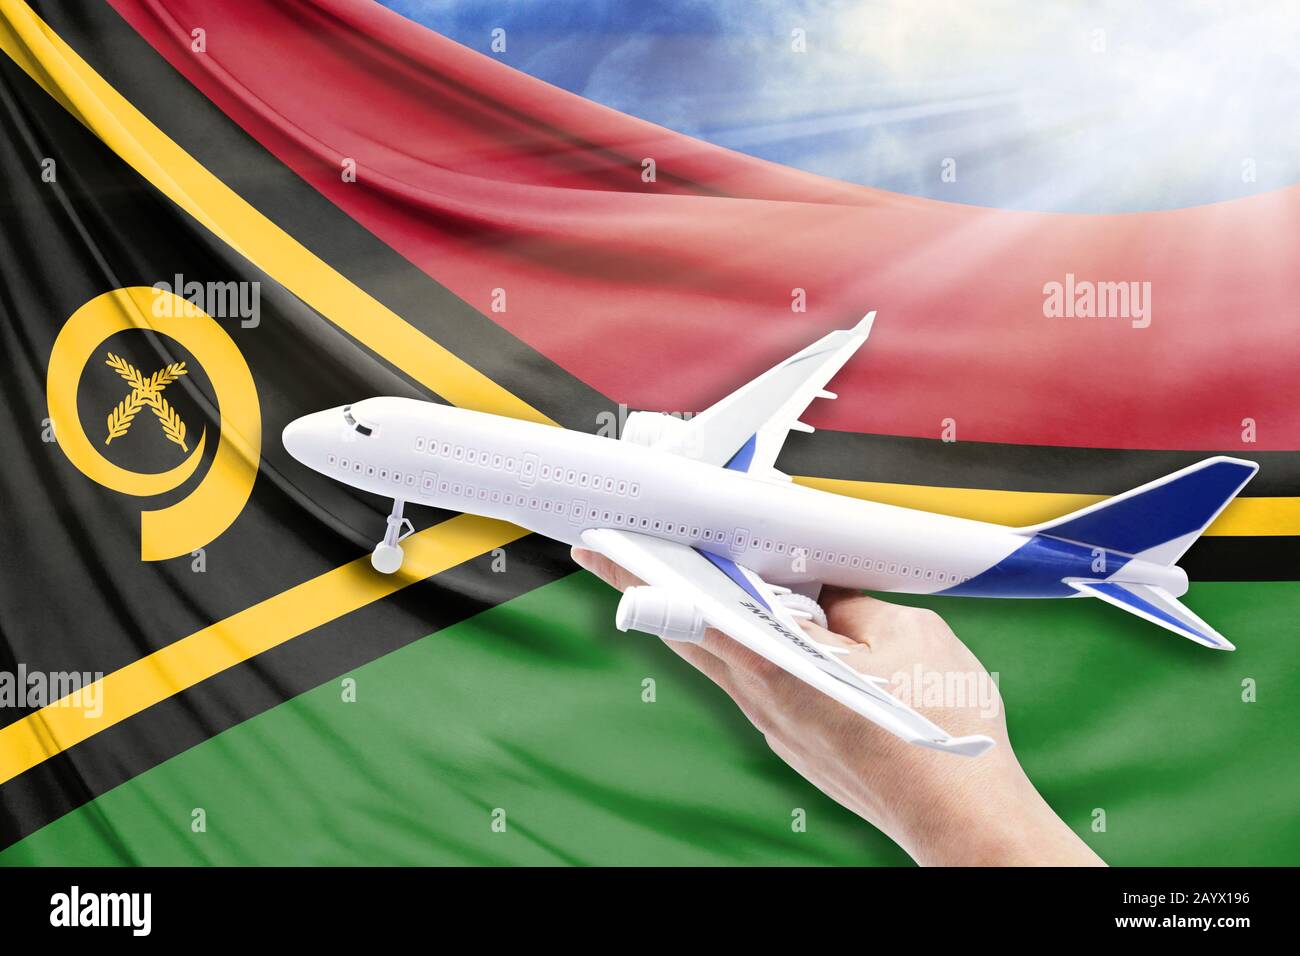 Airplane in hand with national flag of Vanuatu on a background of blue sky with sunbeams Stock Photo